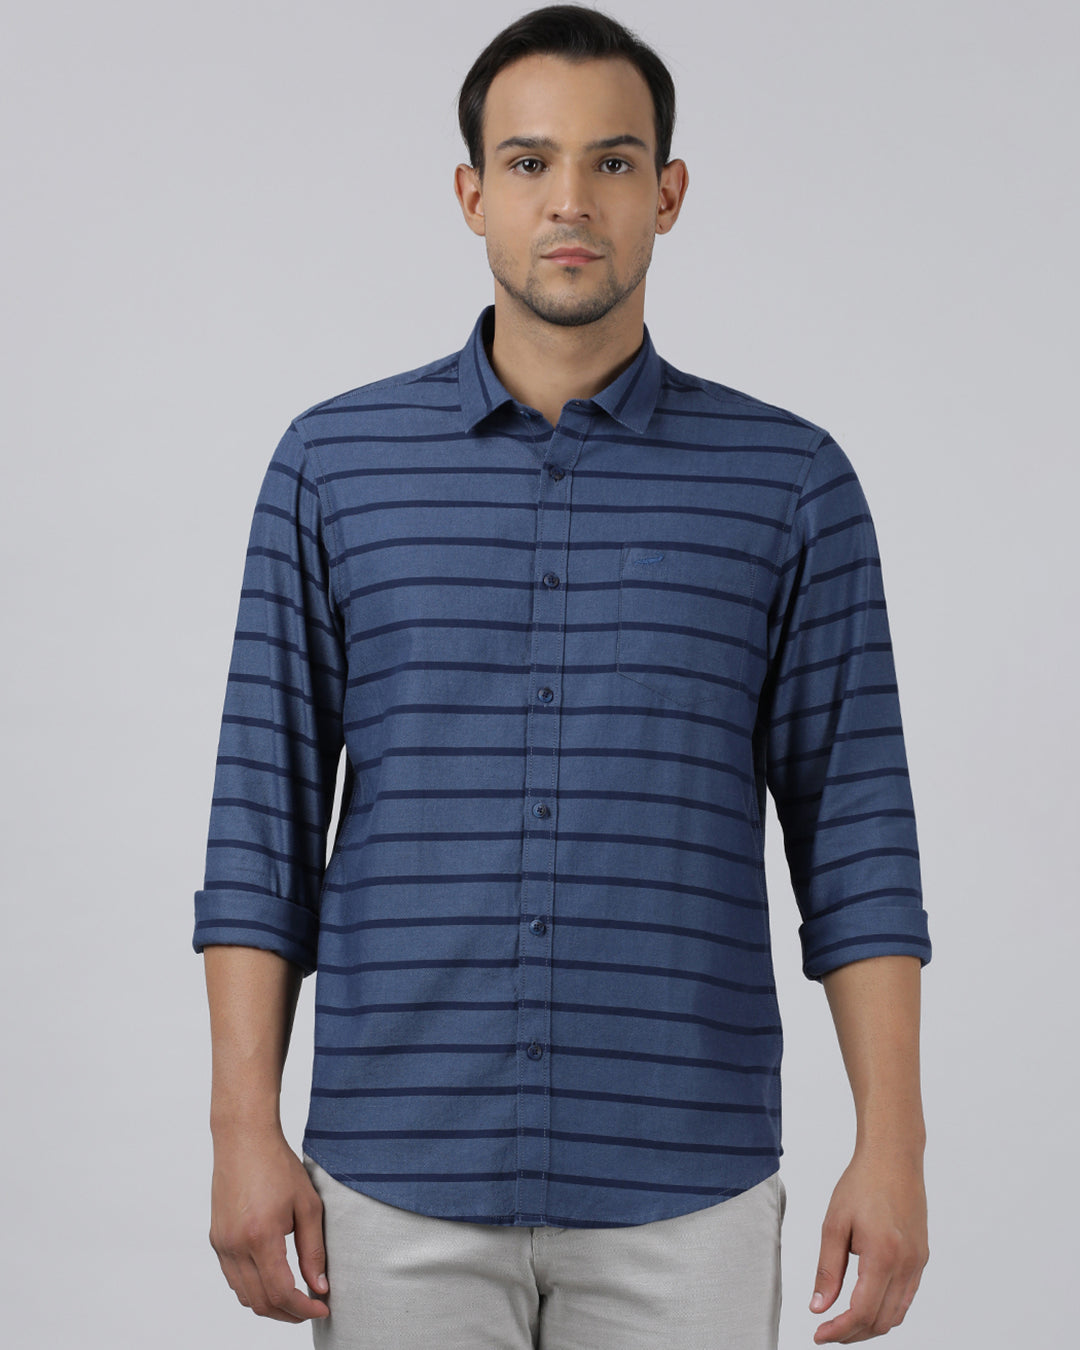 Casual Navy Full Sleeve Regular Fit Stripe Shirt with Collar for Men